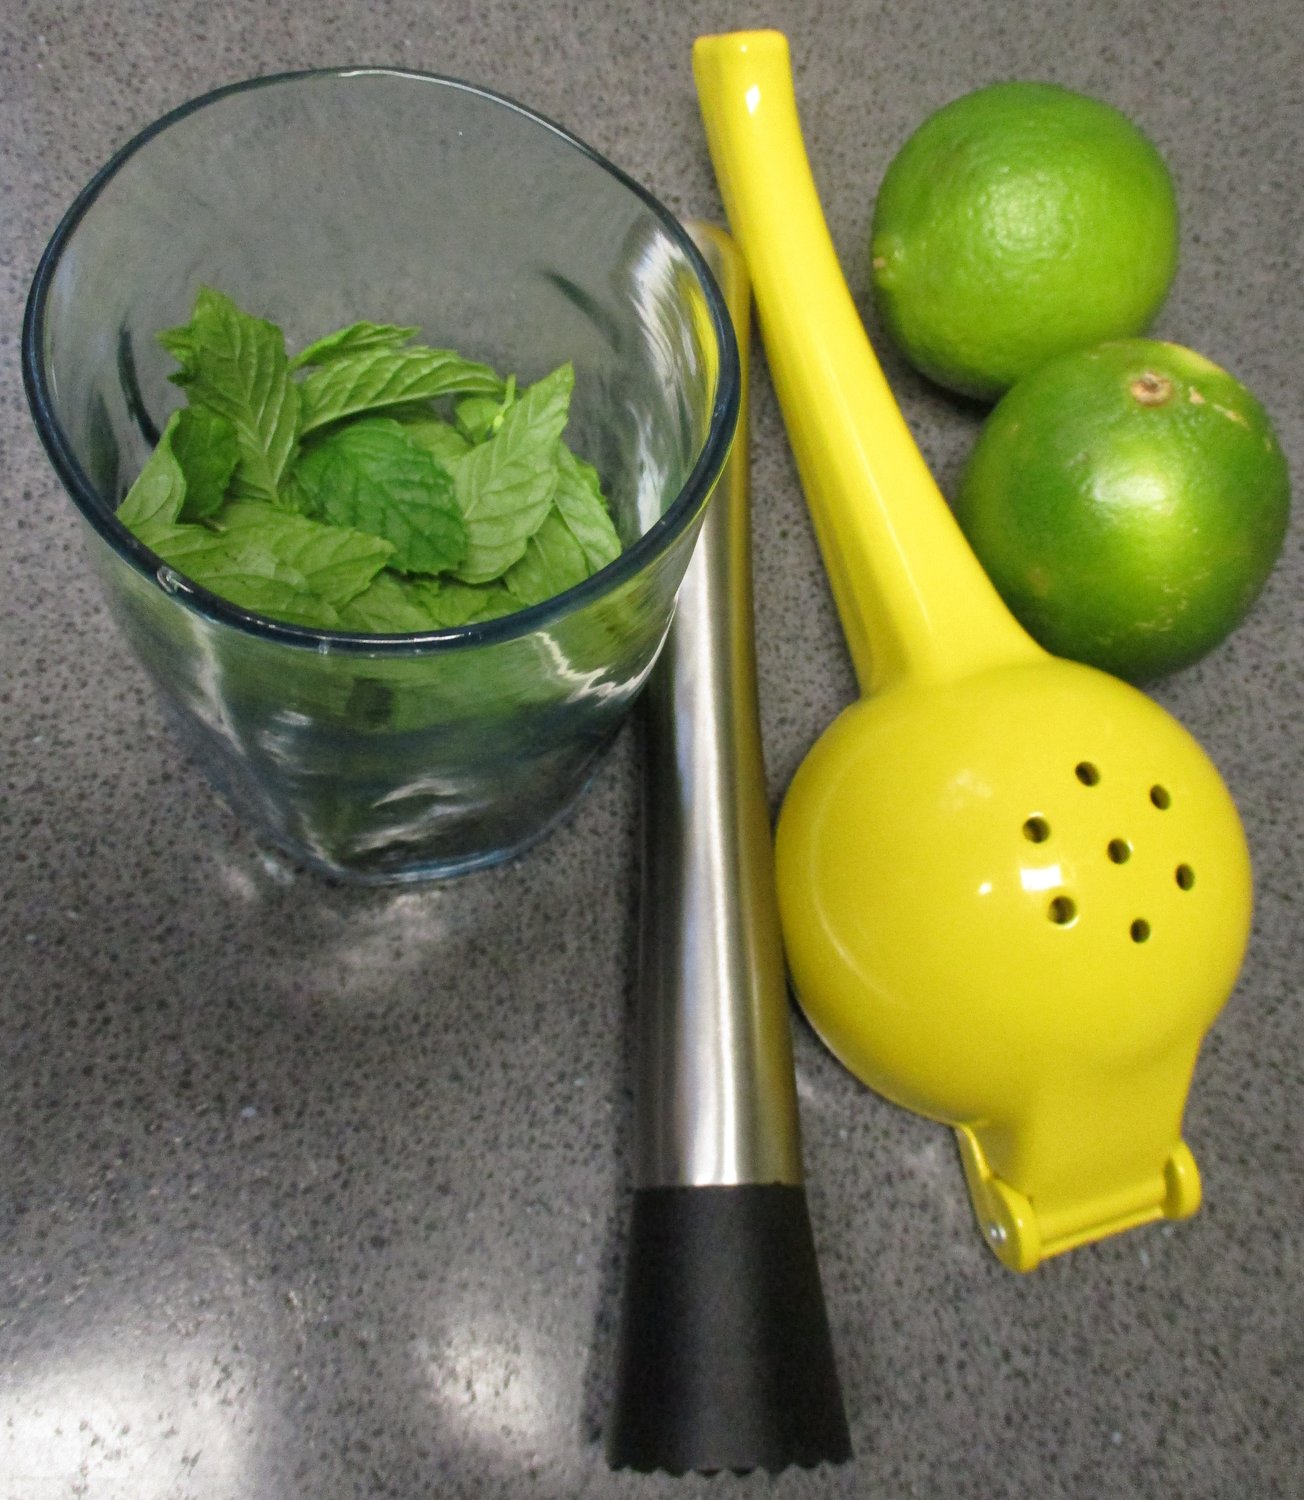 The tools for making mojitos.